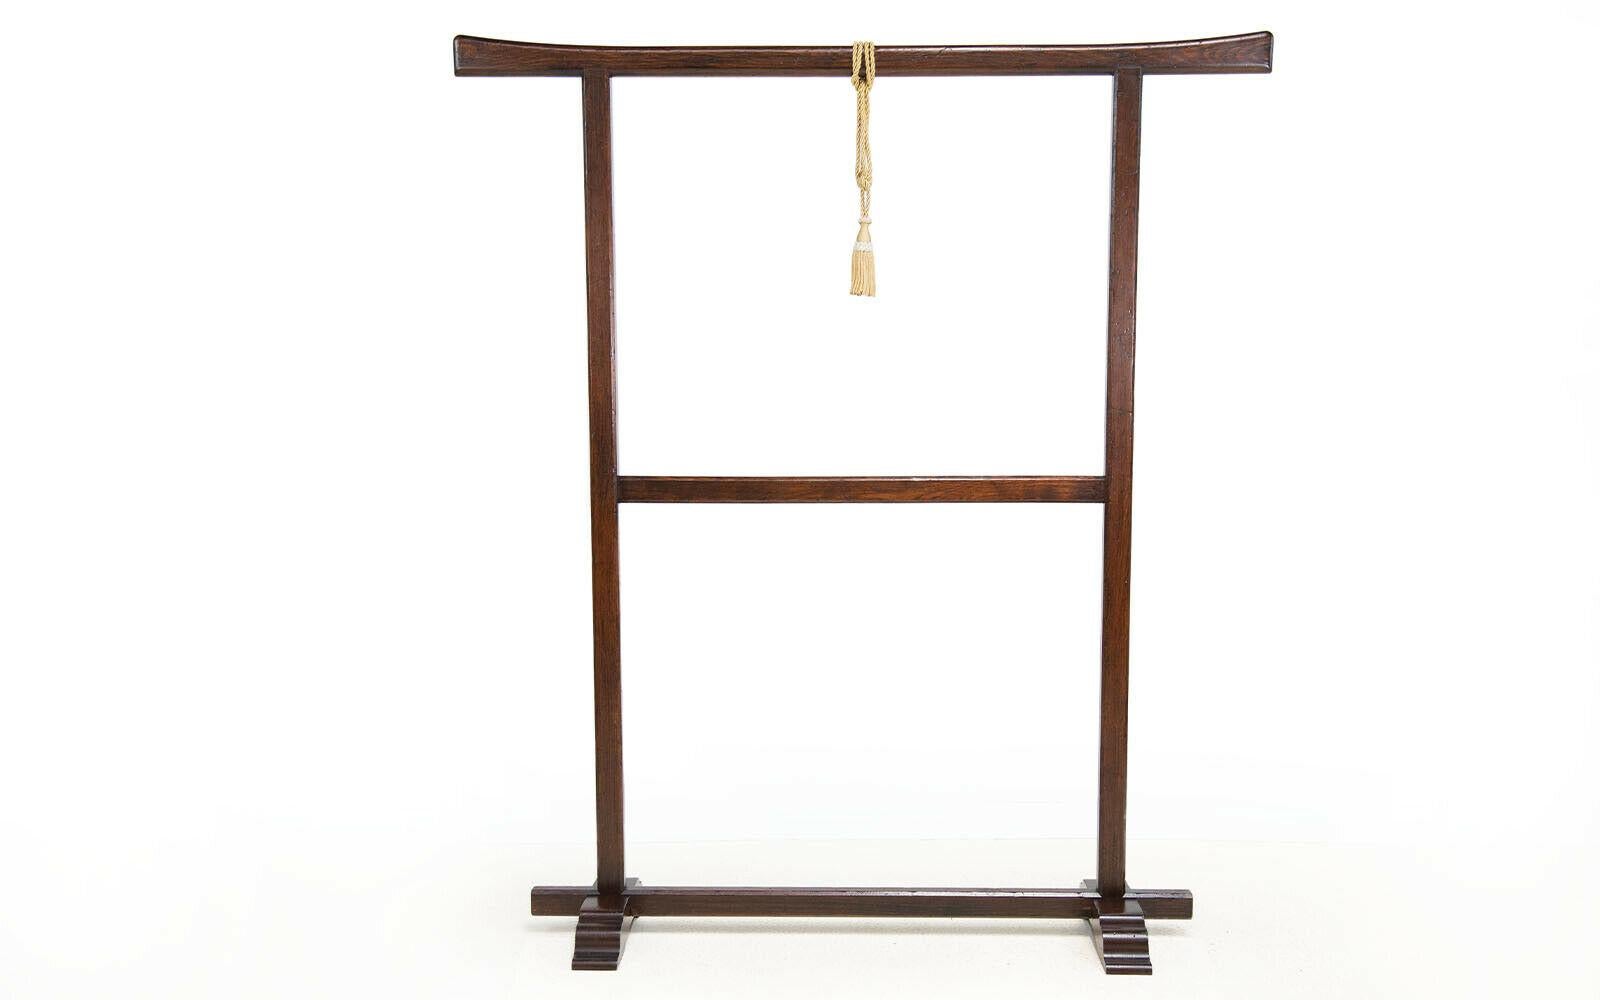 Kimono Display Stands

Offered for sale a pair of decorative 20th century Japanese oriental hardwood kimono display stands. Width 140cm x Height 159cm each feature a gold tassel and sit on support blocks.

The humble beginnings of the kimono,